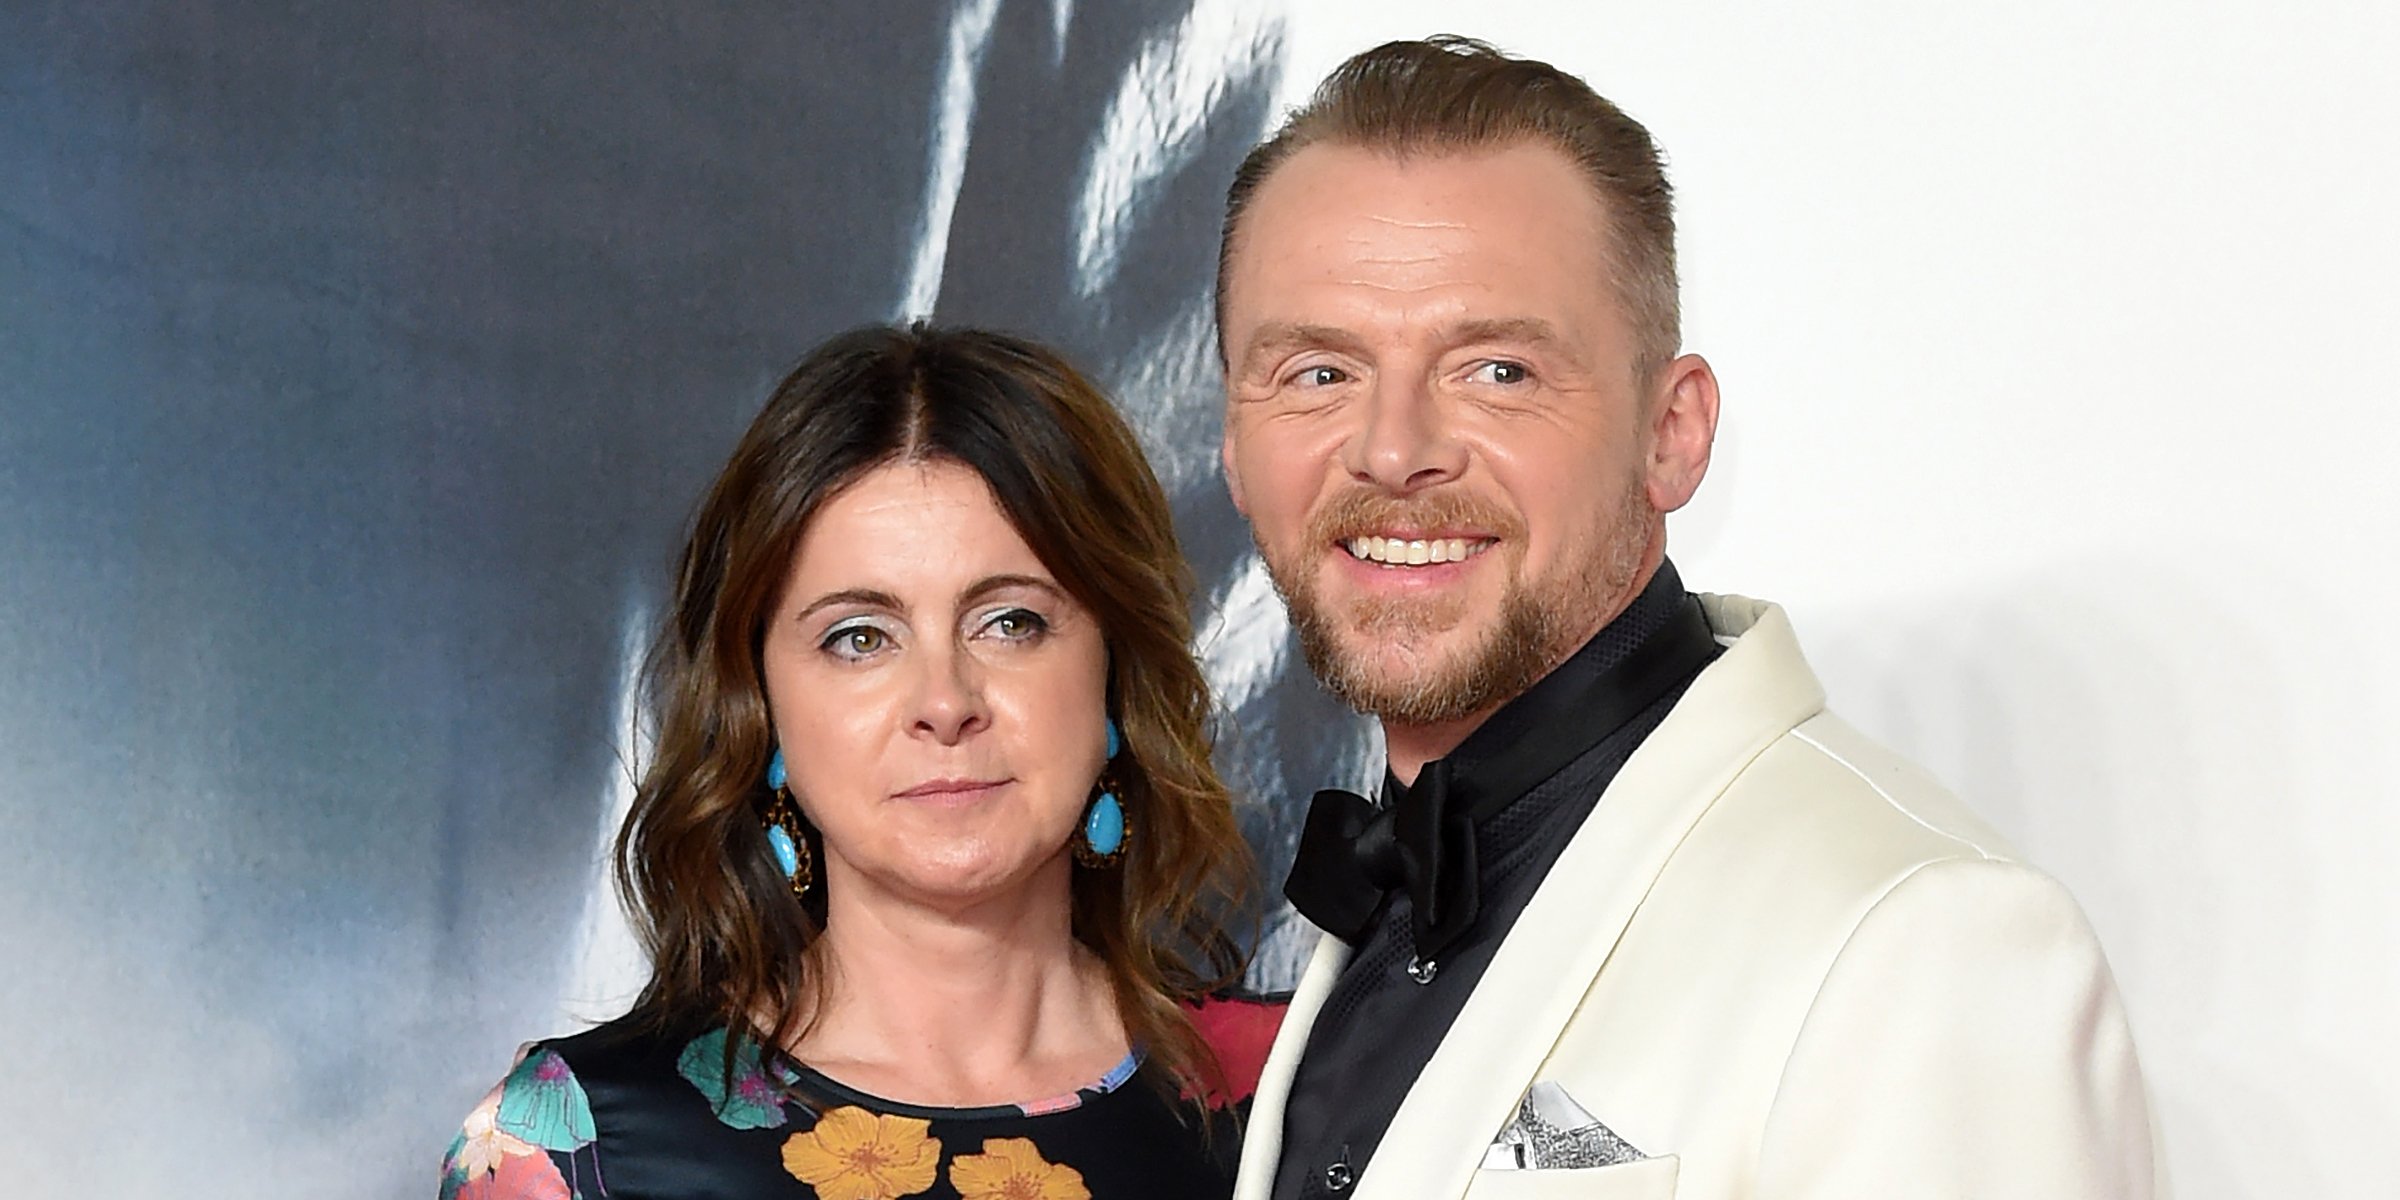 Simon Pegg and Maureen Pegg | Source: Getty Images